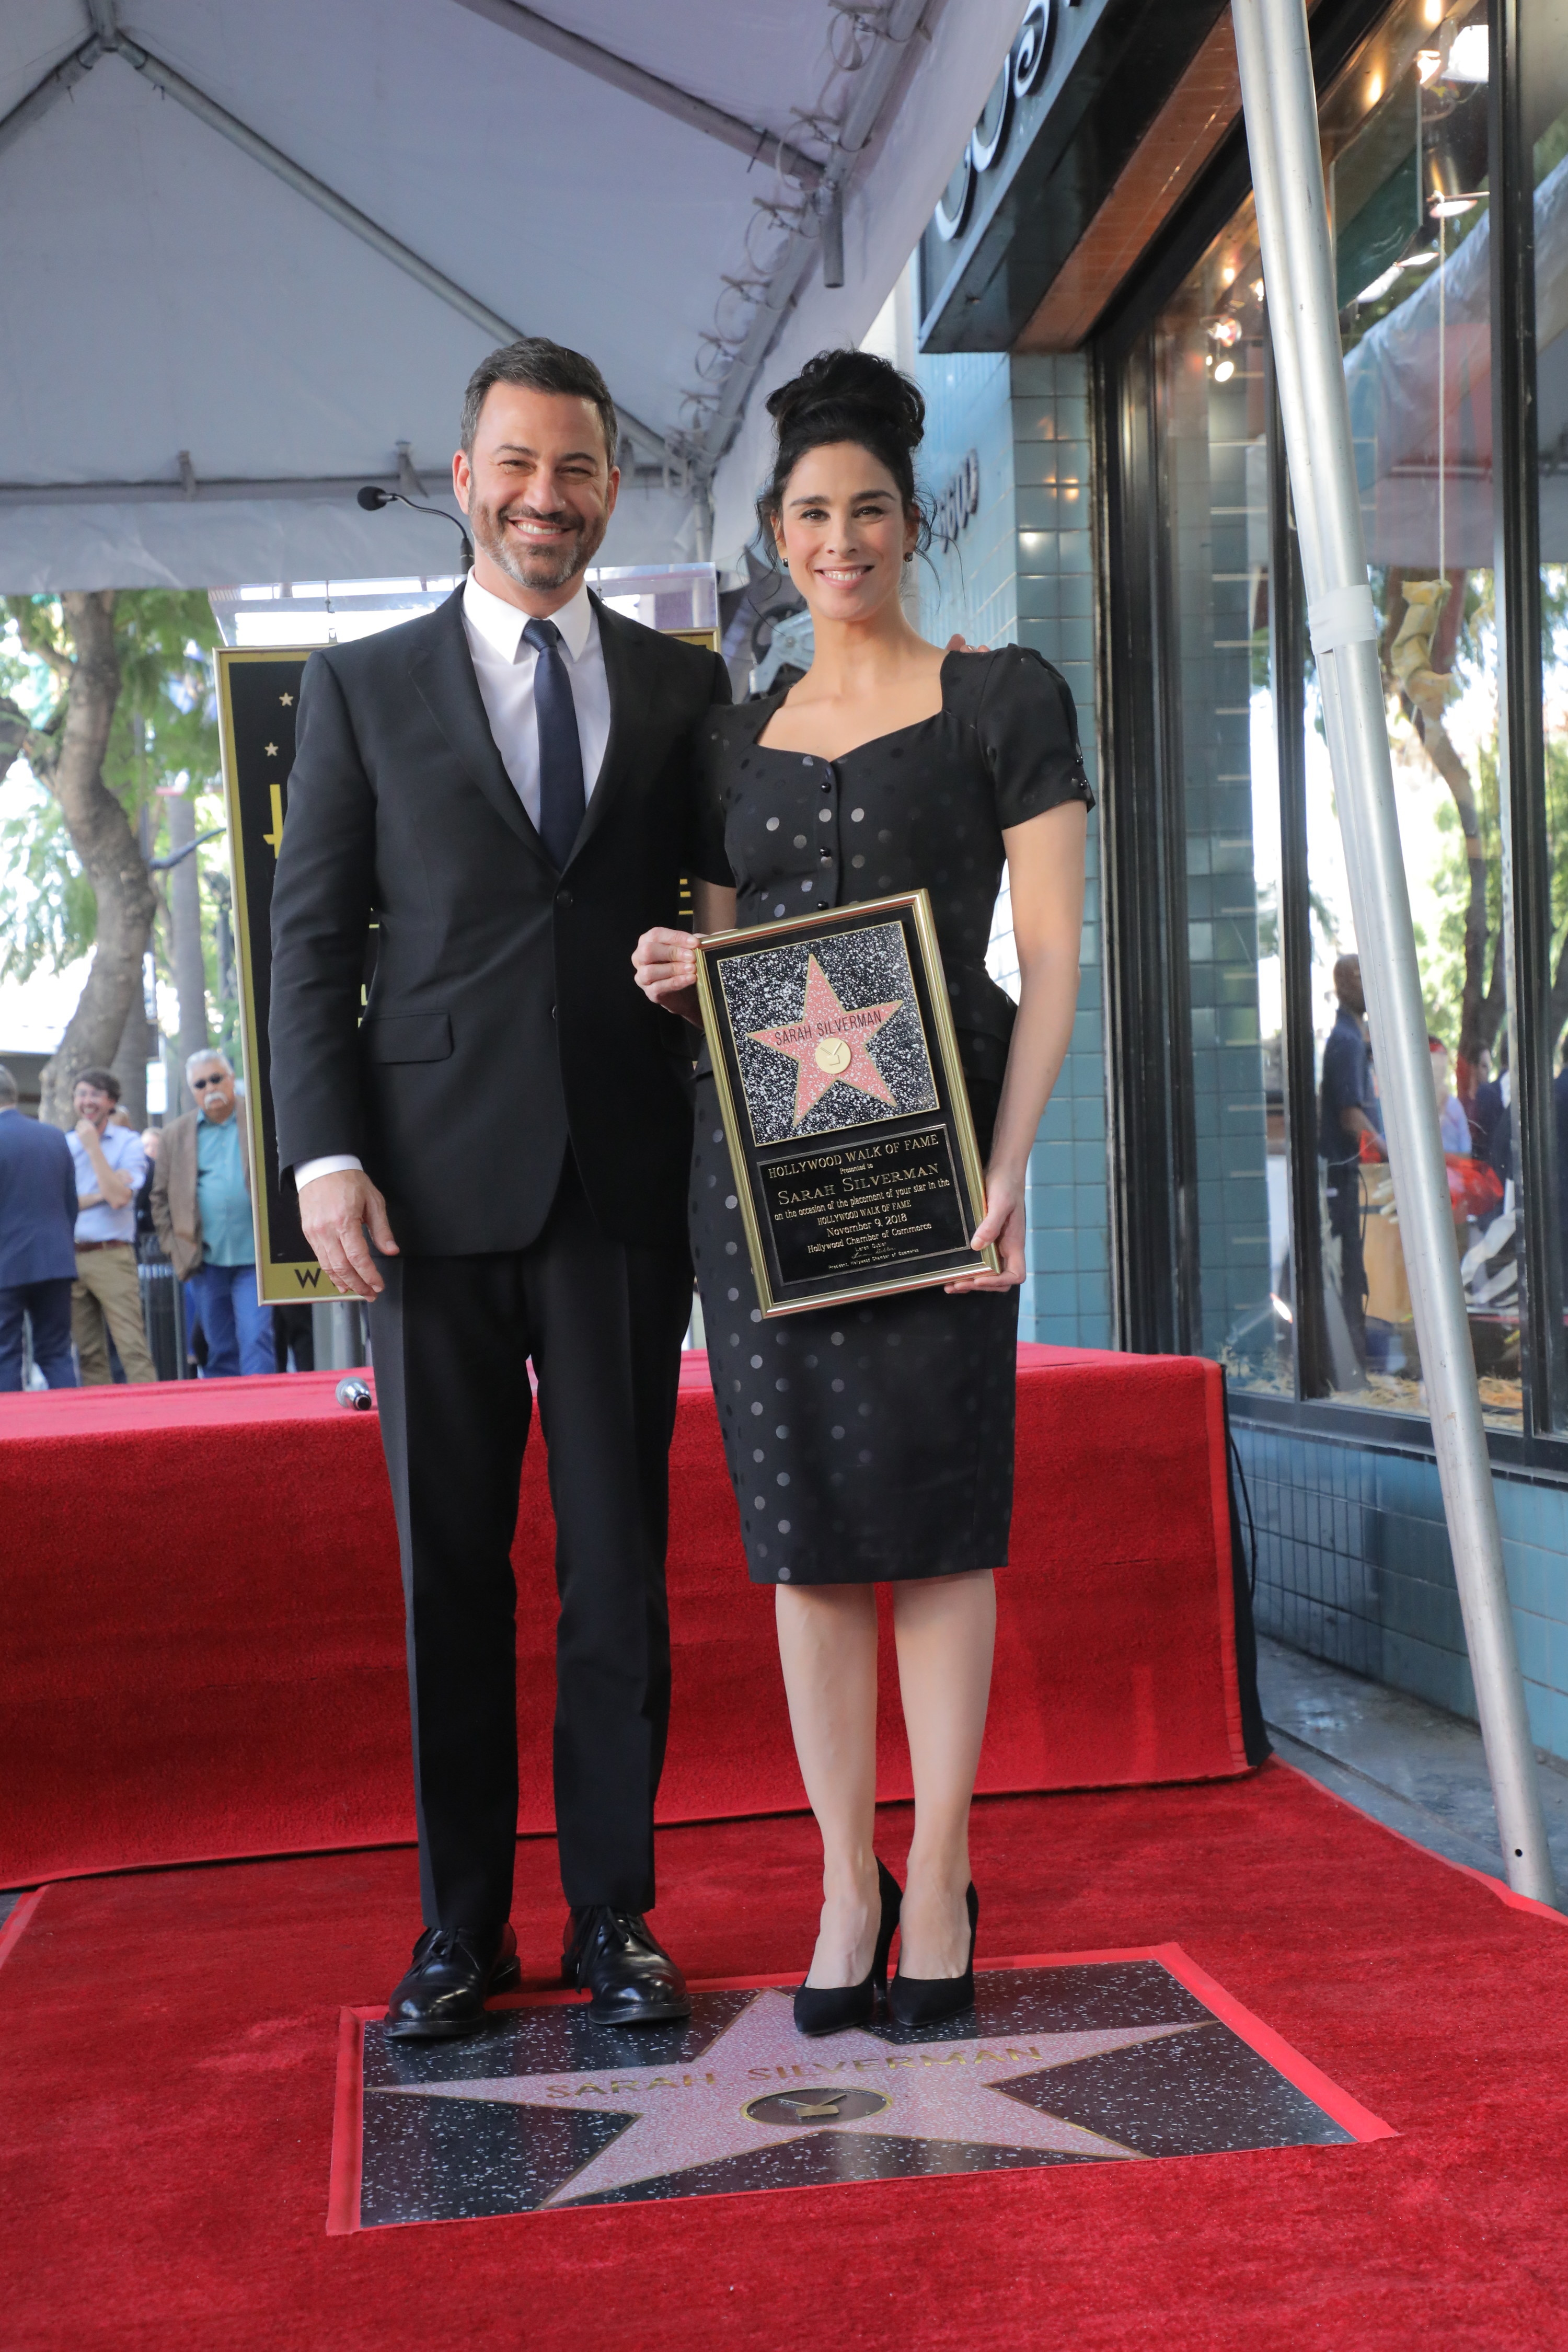 Jimmy Kimmel and Sarah Silverman posing together as she gets her star on the Hollywood Walk of Fame